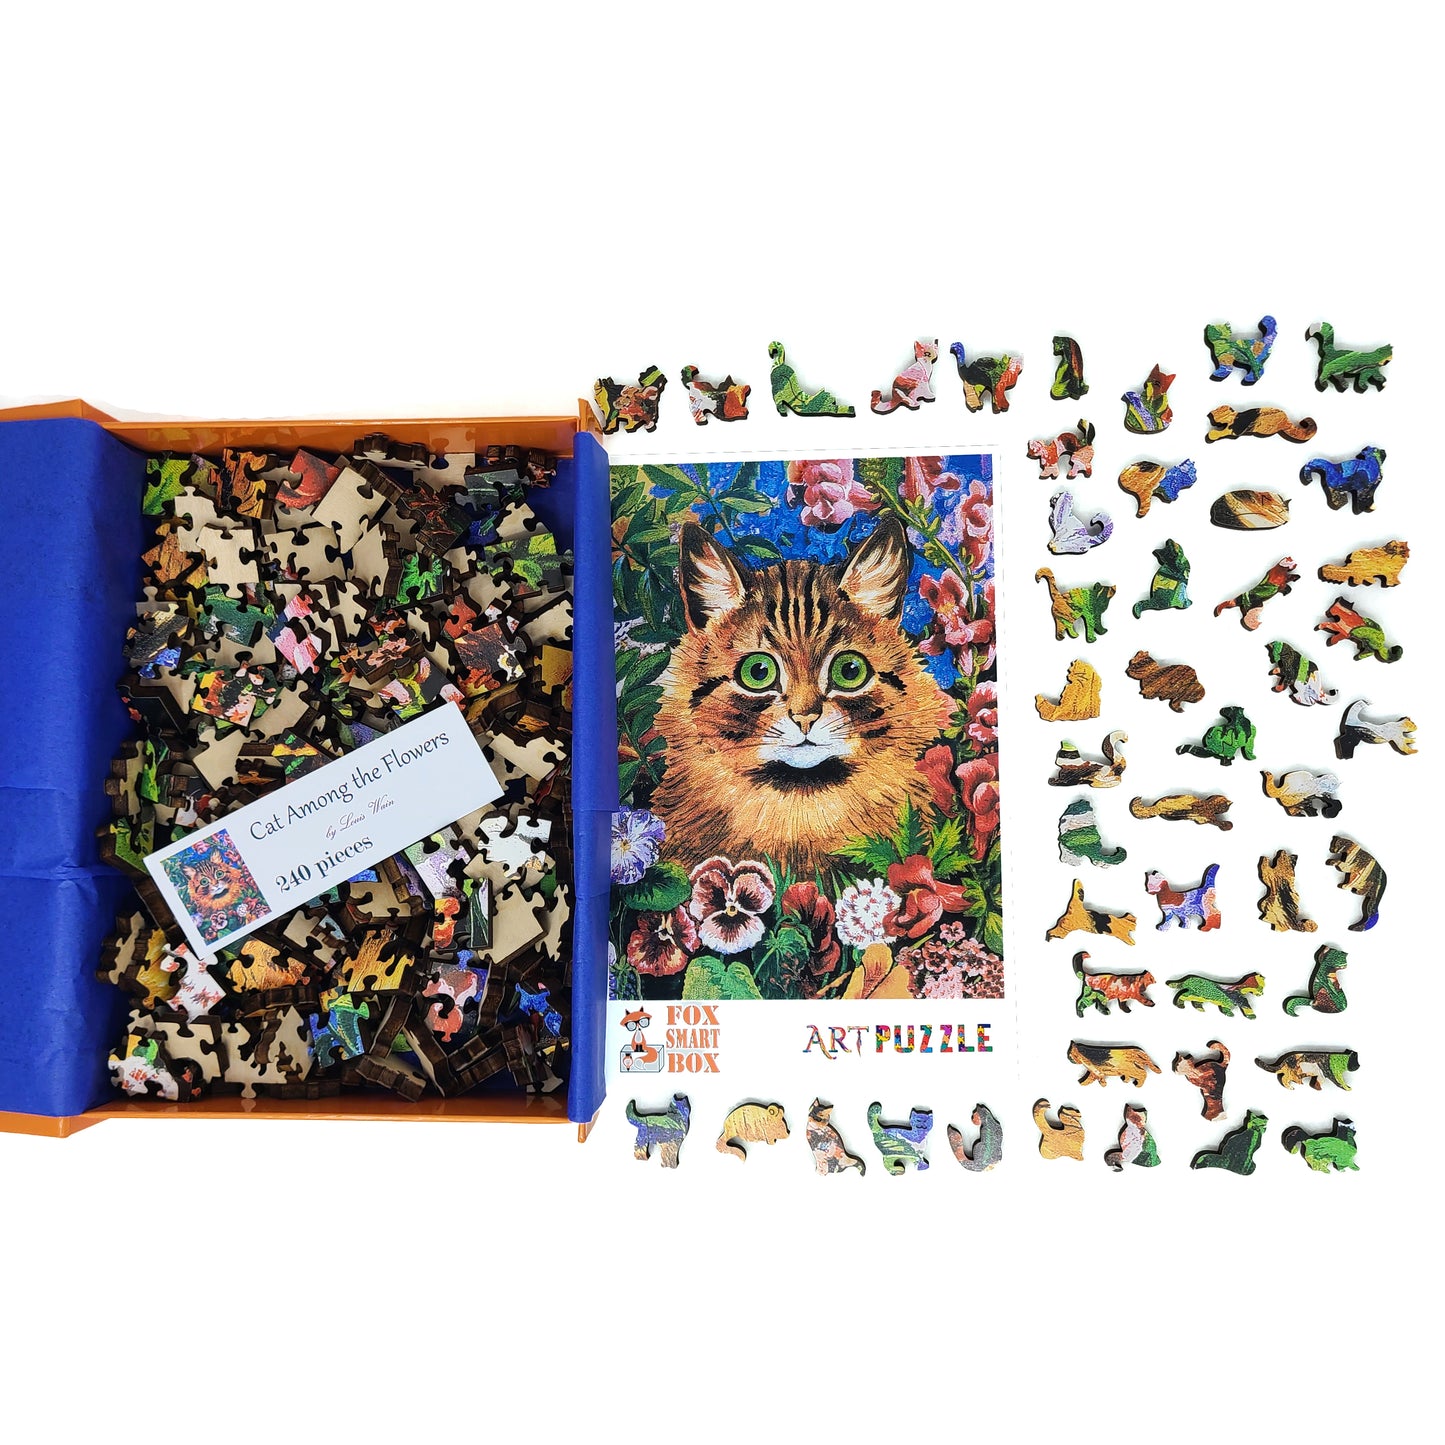 Large Format Wooden Jigsaw Puzzle with Uniquely Shaped Pieces for Seniors and Adults - 240 Pieces - Cat Among the Flowers